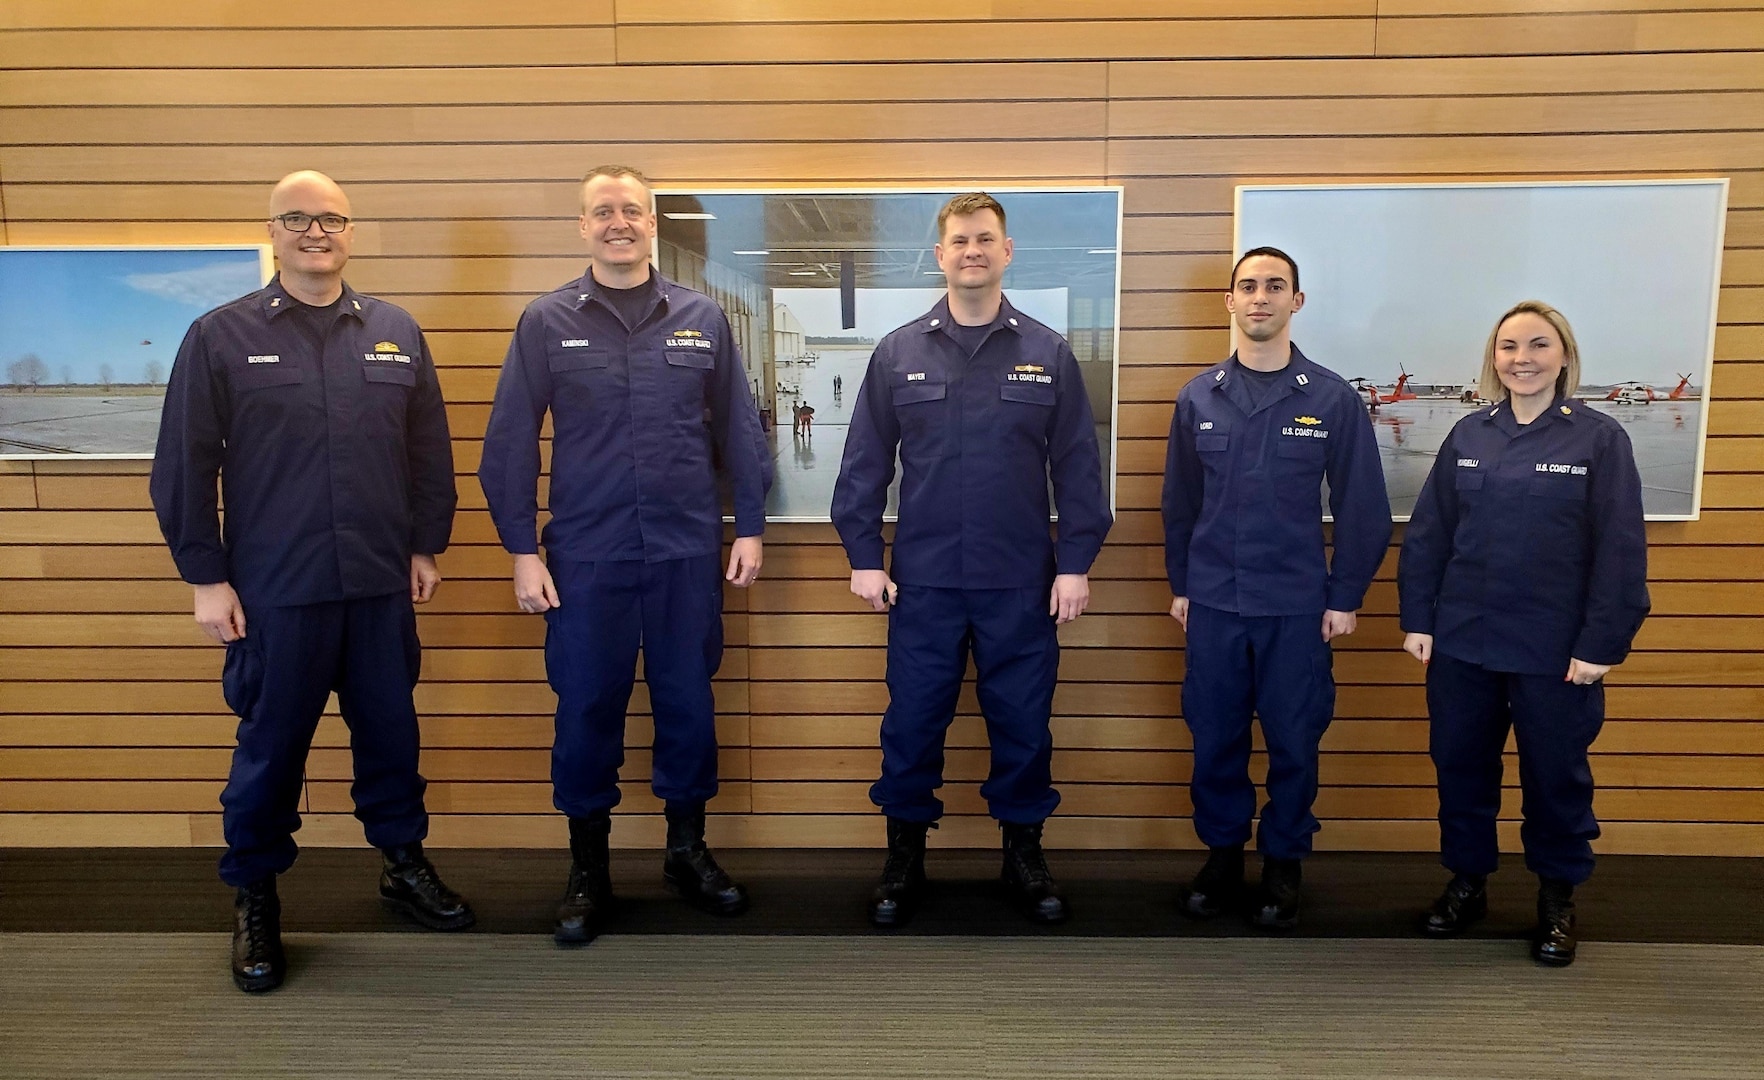 The PRTF team works to solve challenges facing the workforce. (From left to right) PFRT team members for calendar year 2020 Master Chief Petty Officer Carl Boehmer, Capt. Thomas Kaminski, Cmdr. Russ Mayer, Lt. James Lord, Petty Officer 1st Class Angelique Limongell are the team members that served throughout calendar year 2020.